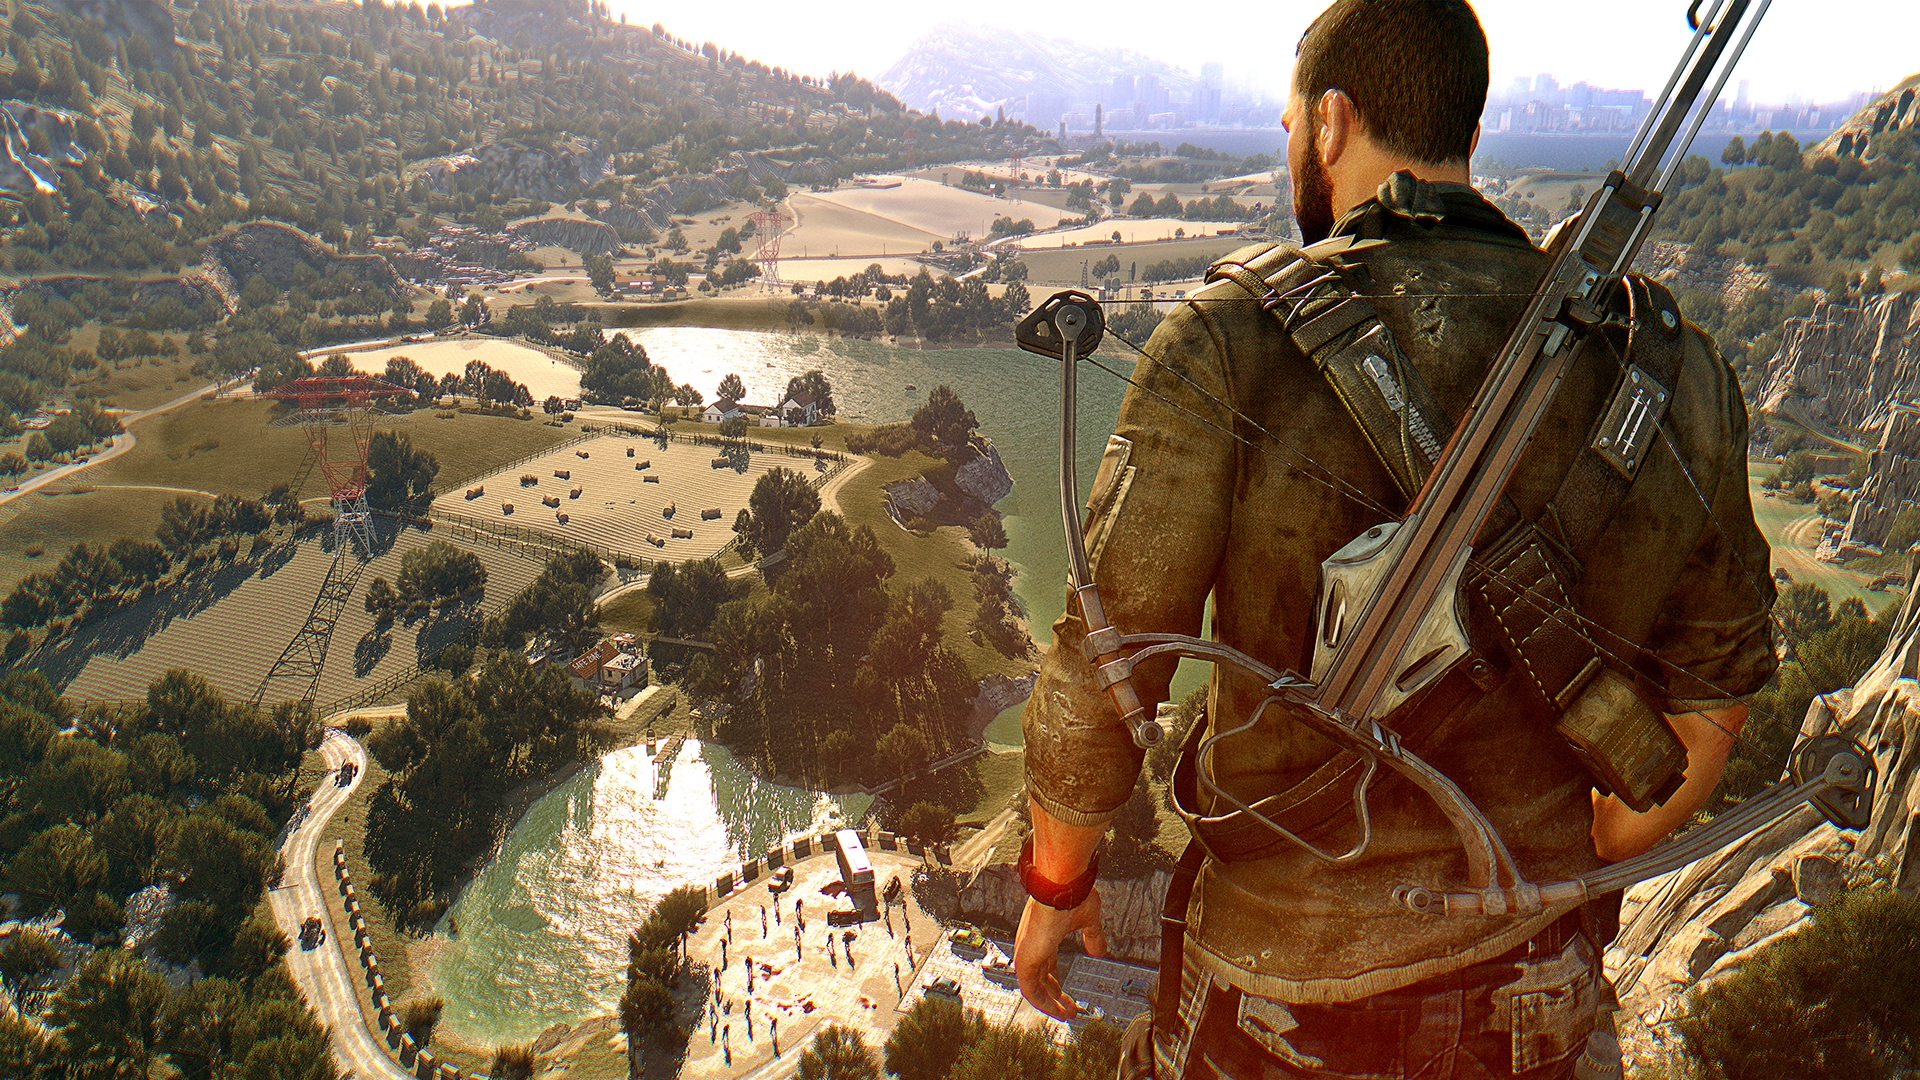 dying light the following review